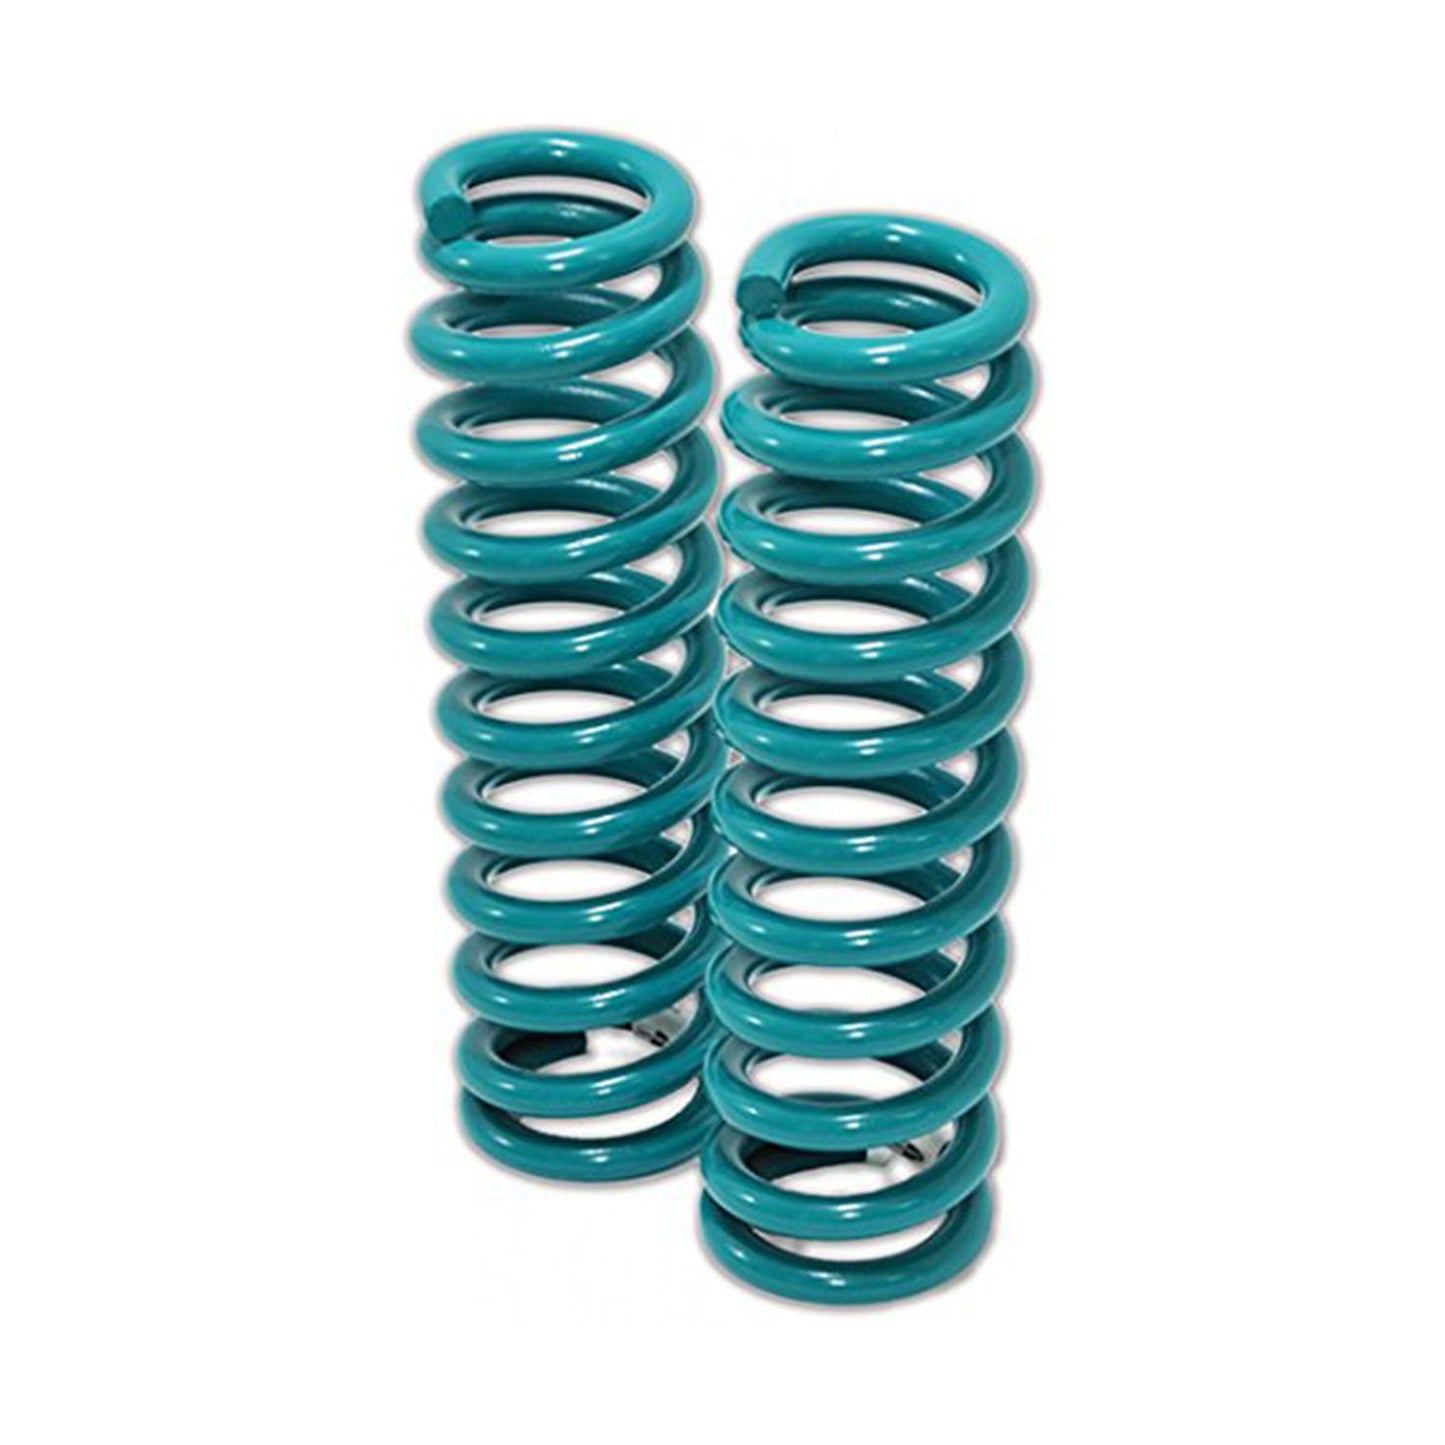 Dobinsons Front Coil Springs for Toyota Landcruiser 200 series 4.7L and 5.7L engines 2008-2021 35mm 1.5" Lift (C59-540)